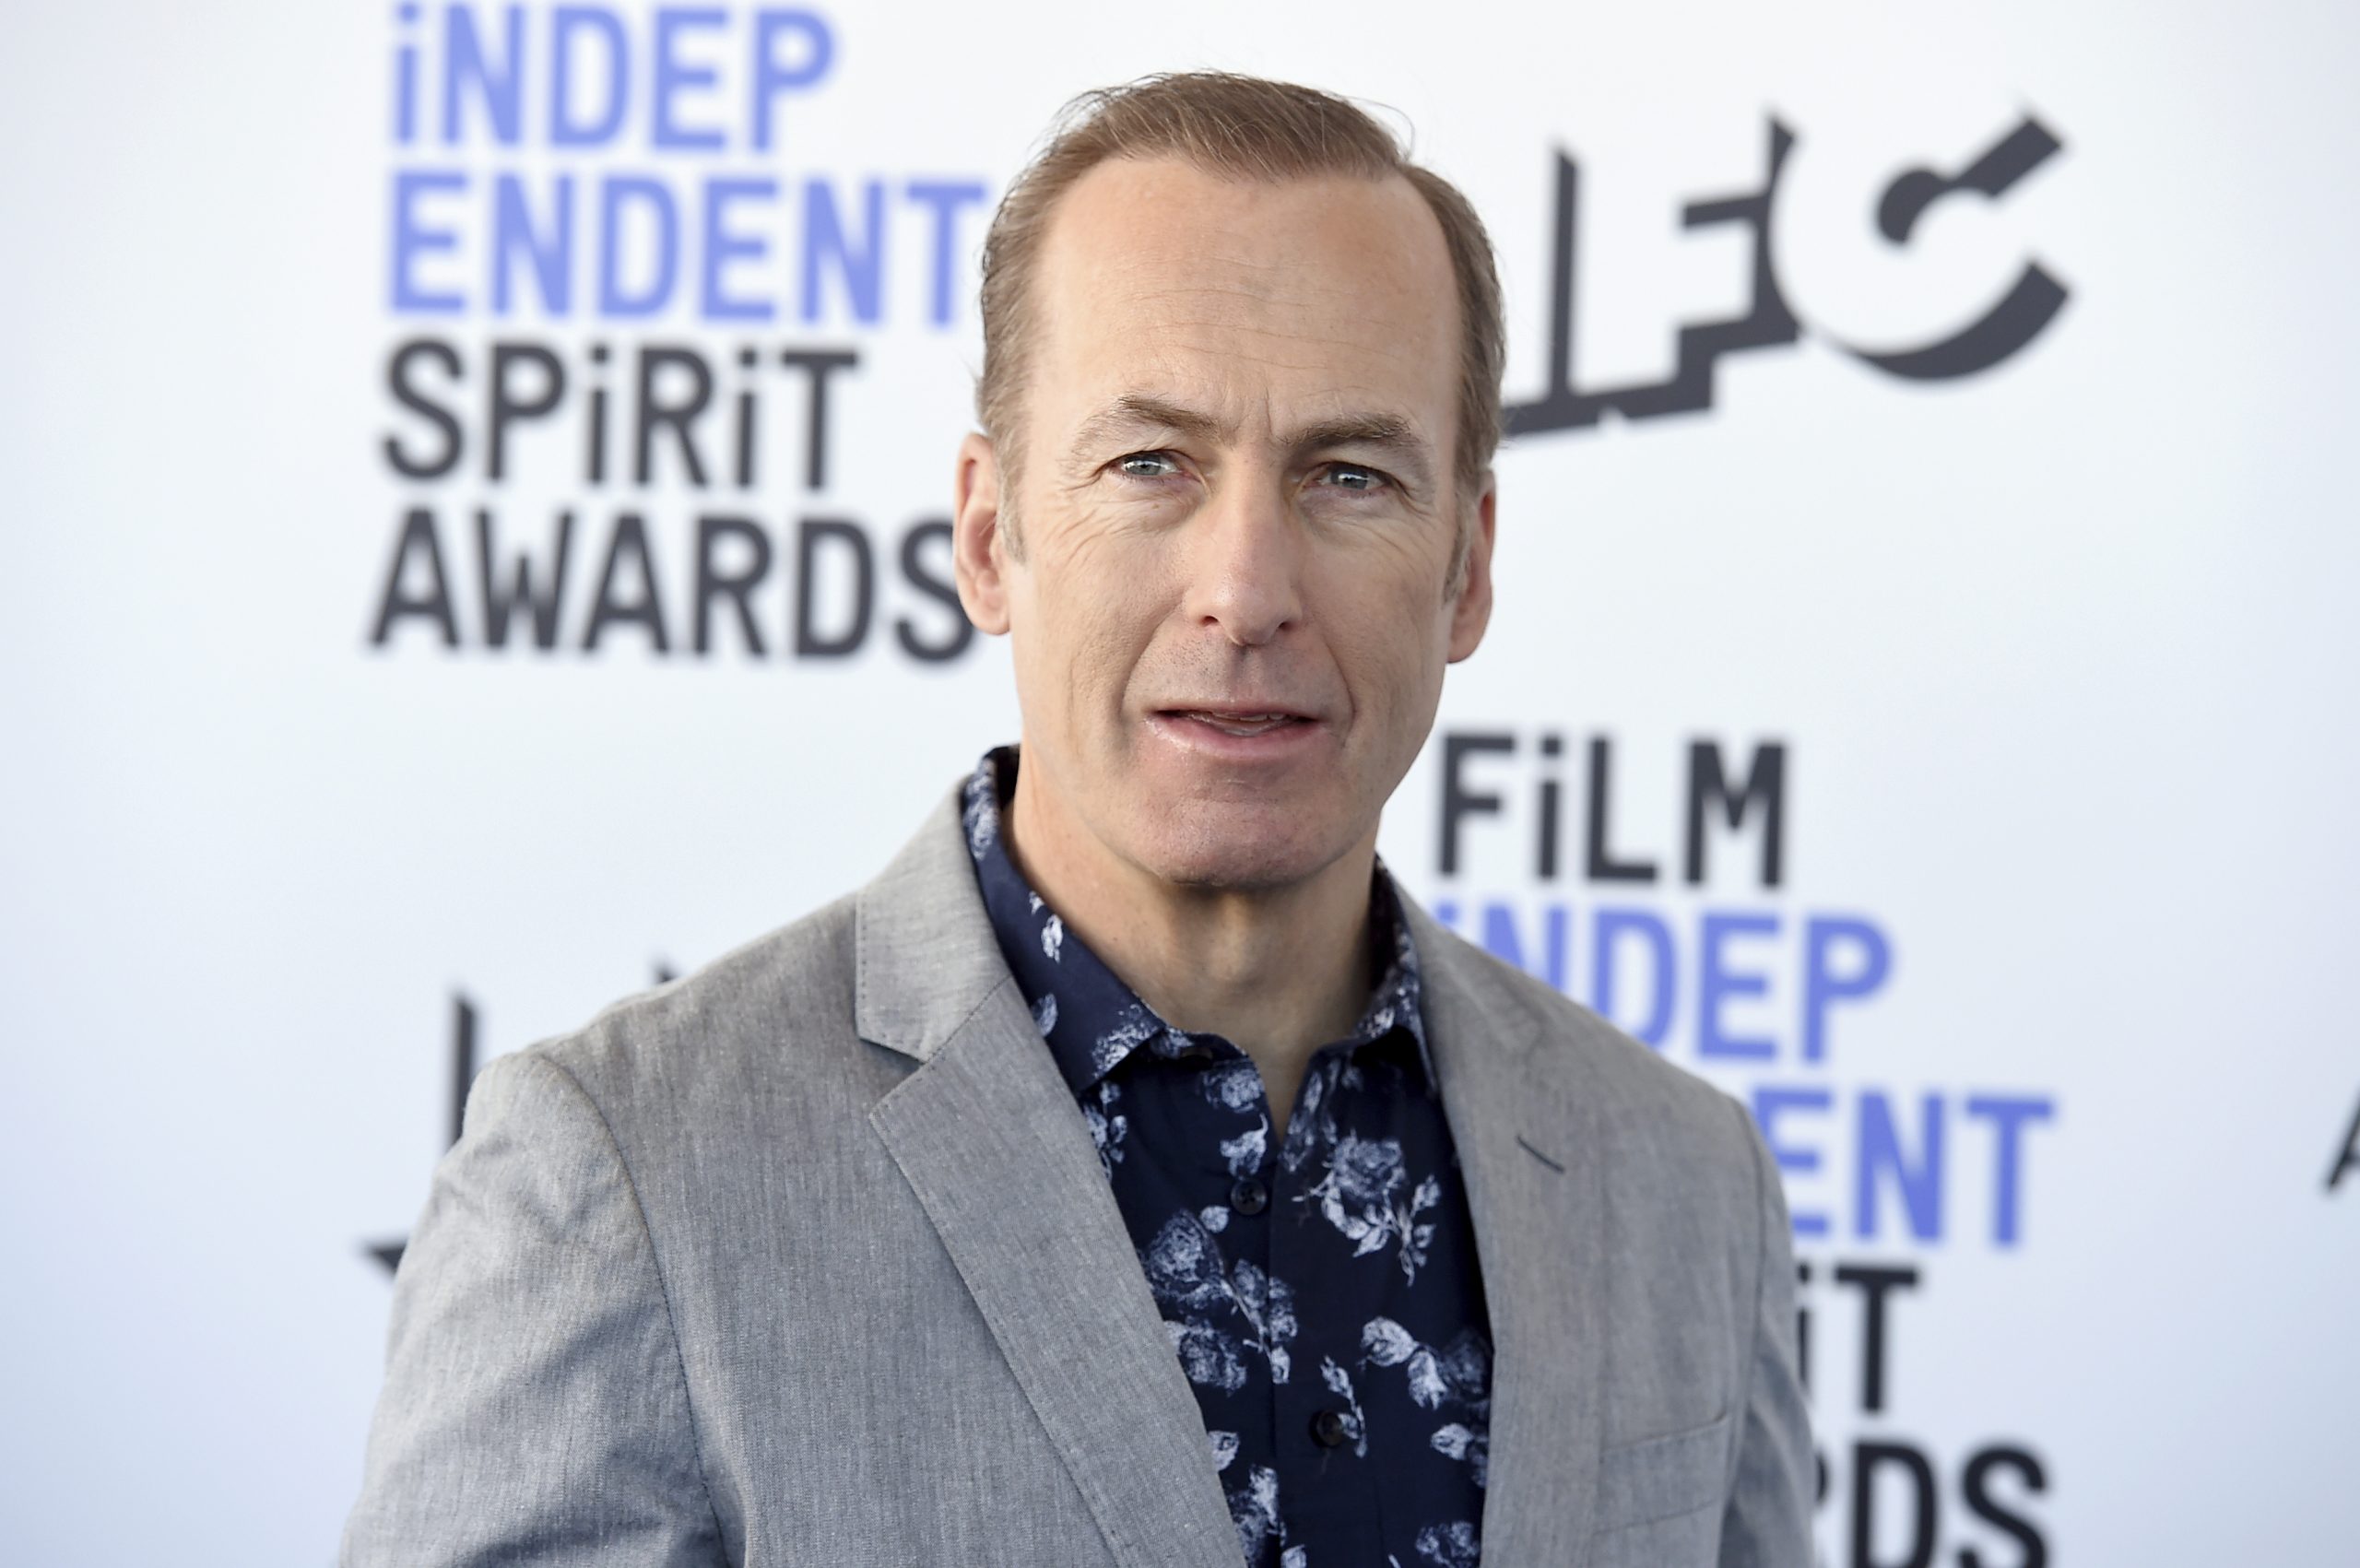 Bob Odenkirk arrives at the 35th Film Independent Spirit Awards on Saturday, Feb. 8, 2020, in Santa Monica, Calif. (Photo by Jordan Strauss/Invision/AP)